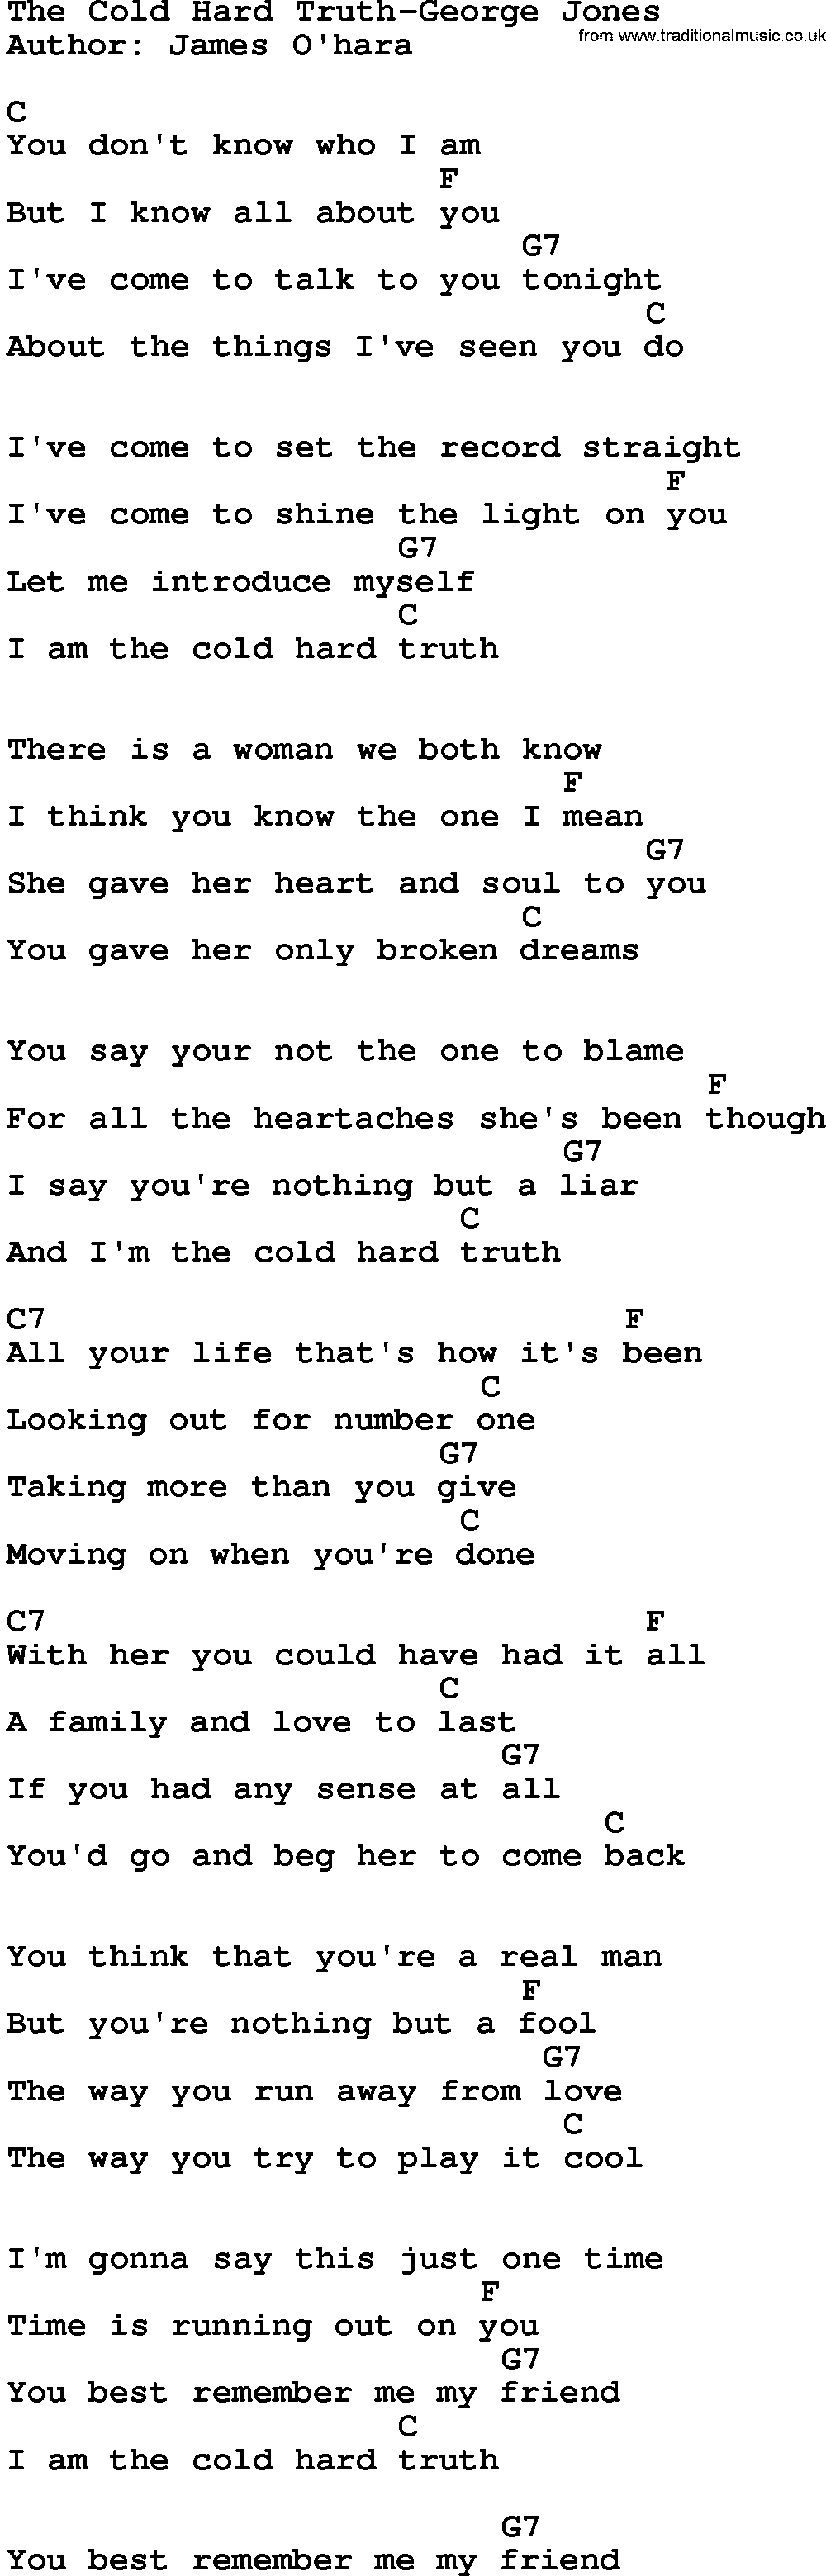 Country music song: The Cold Hard Truth-George Jones lyrics and chords